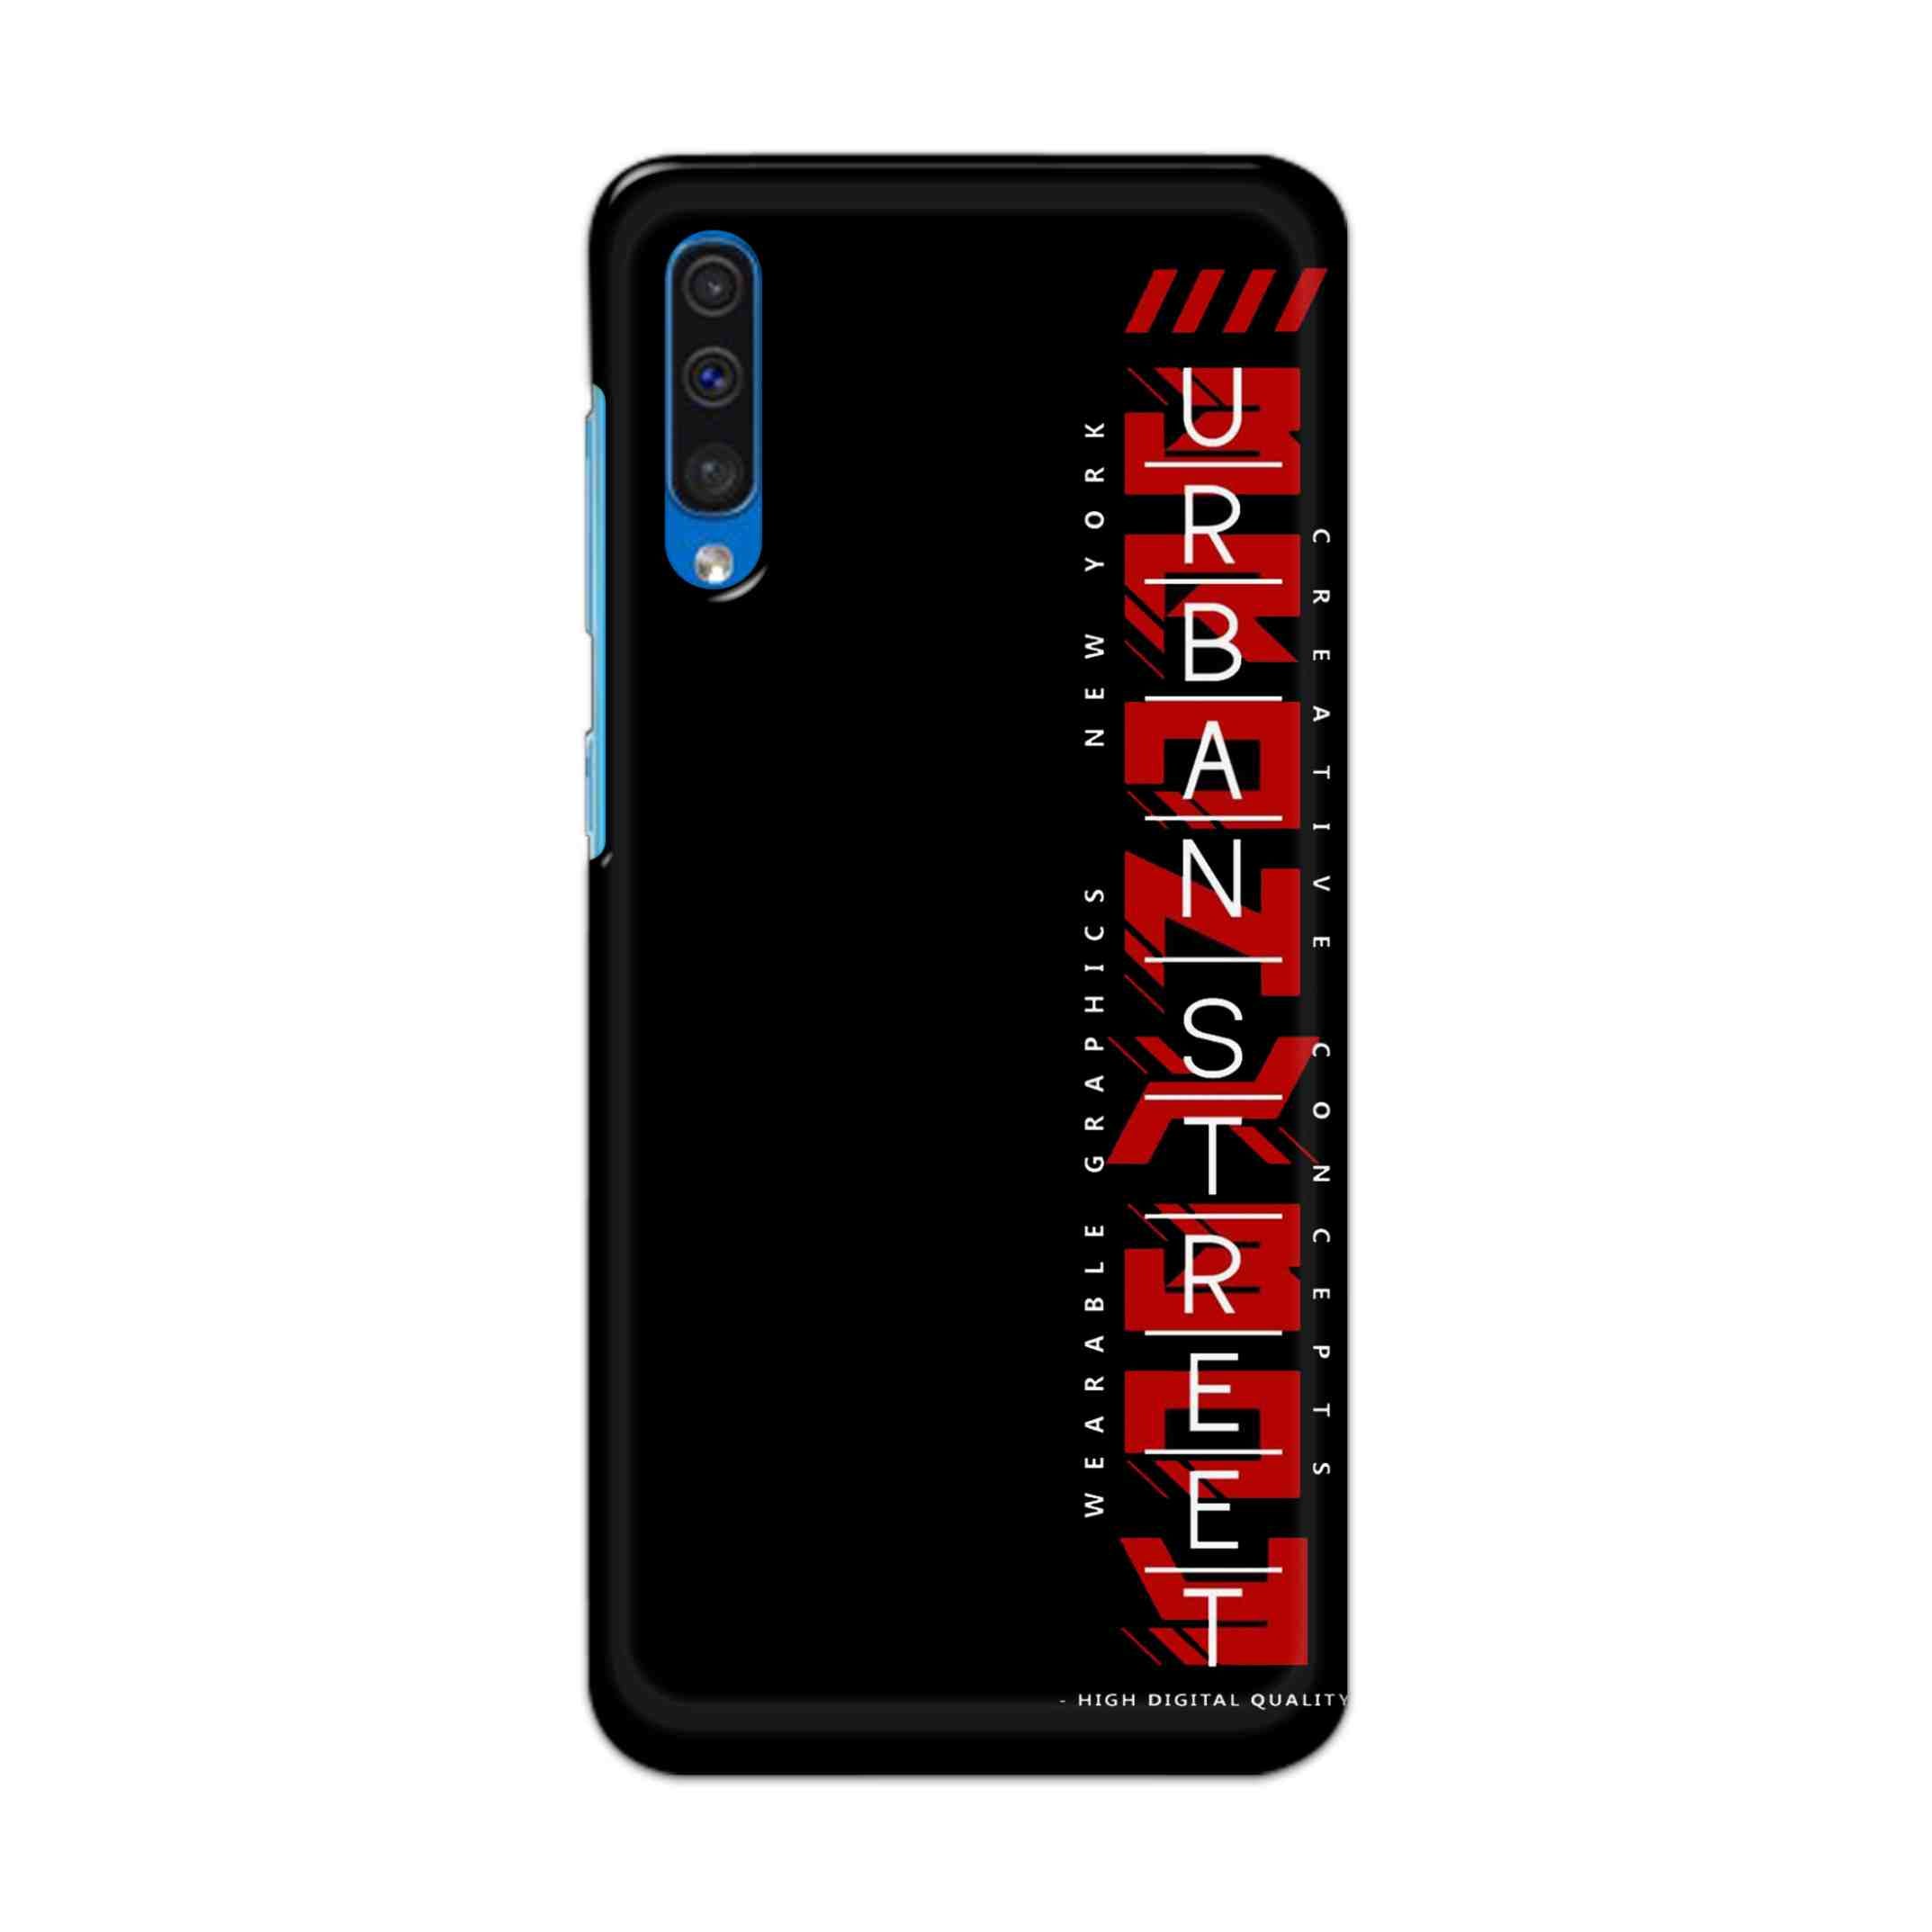 Buy Urban Street Hard Back Mobile Phone Case Cover For Samsung Galaxy A50 / A50s / A30s Online